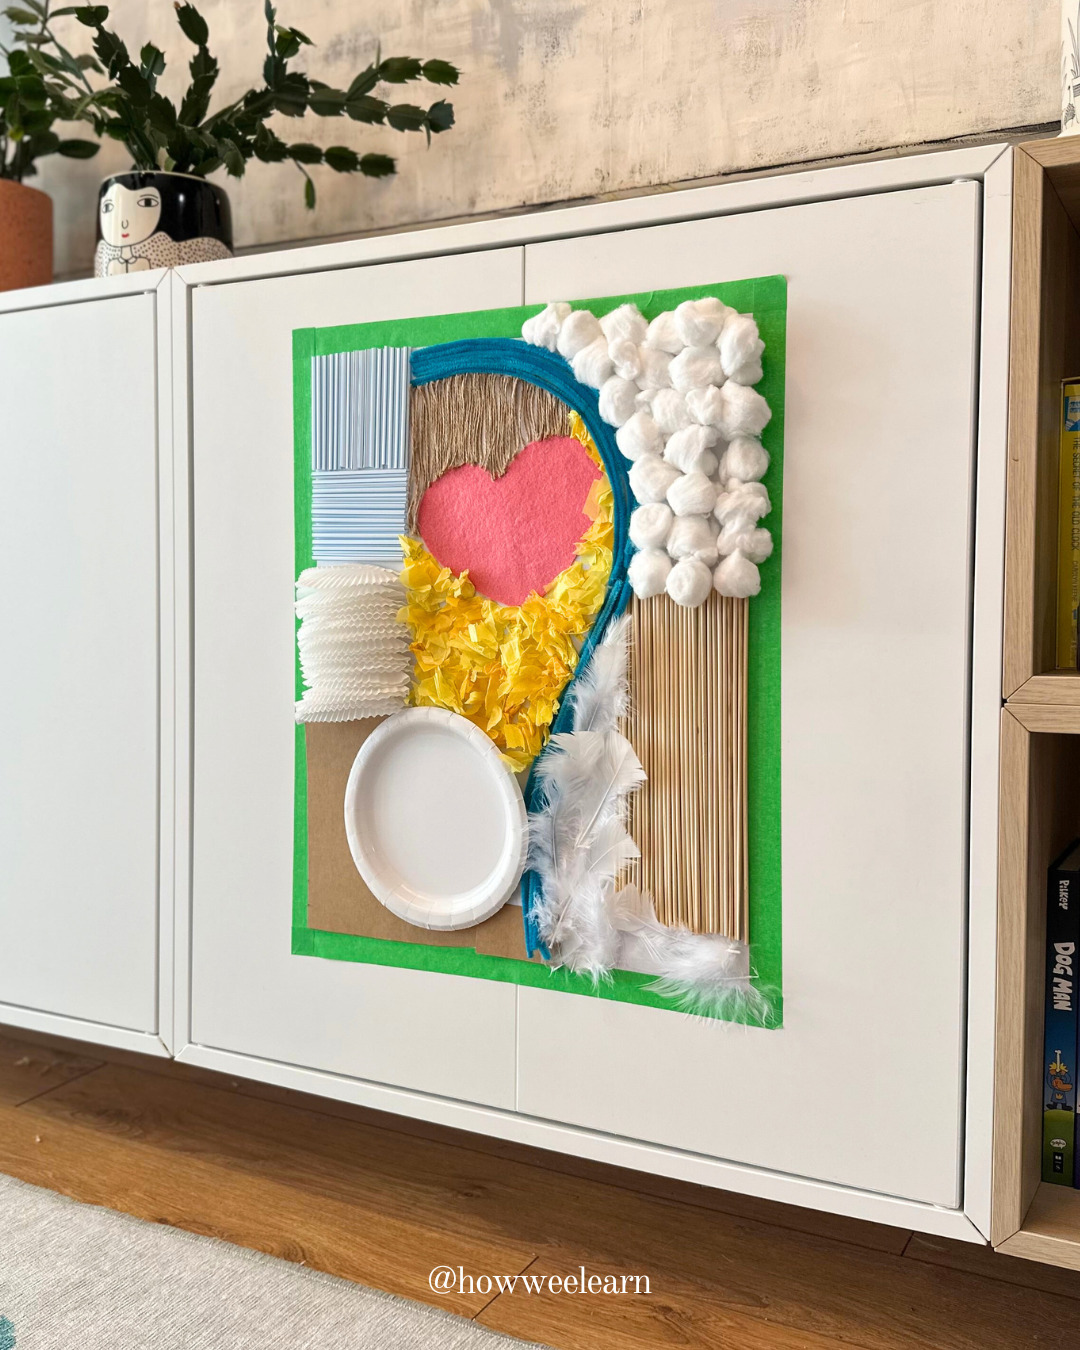 A sensory wall secured to a cabinet for toddlers